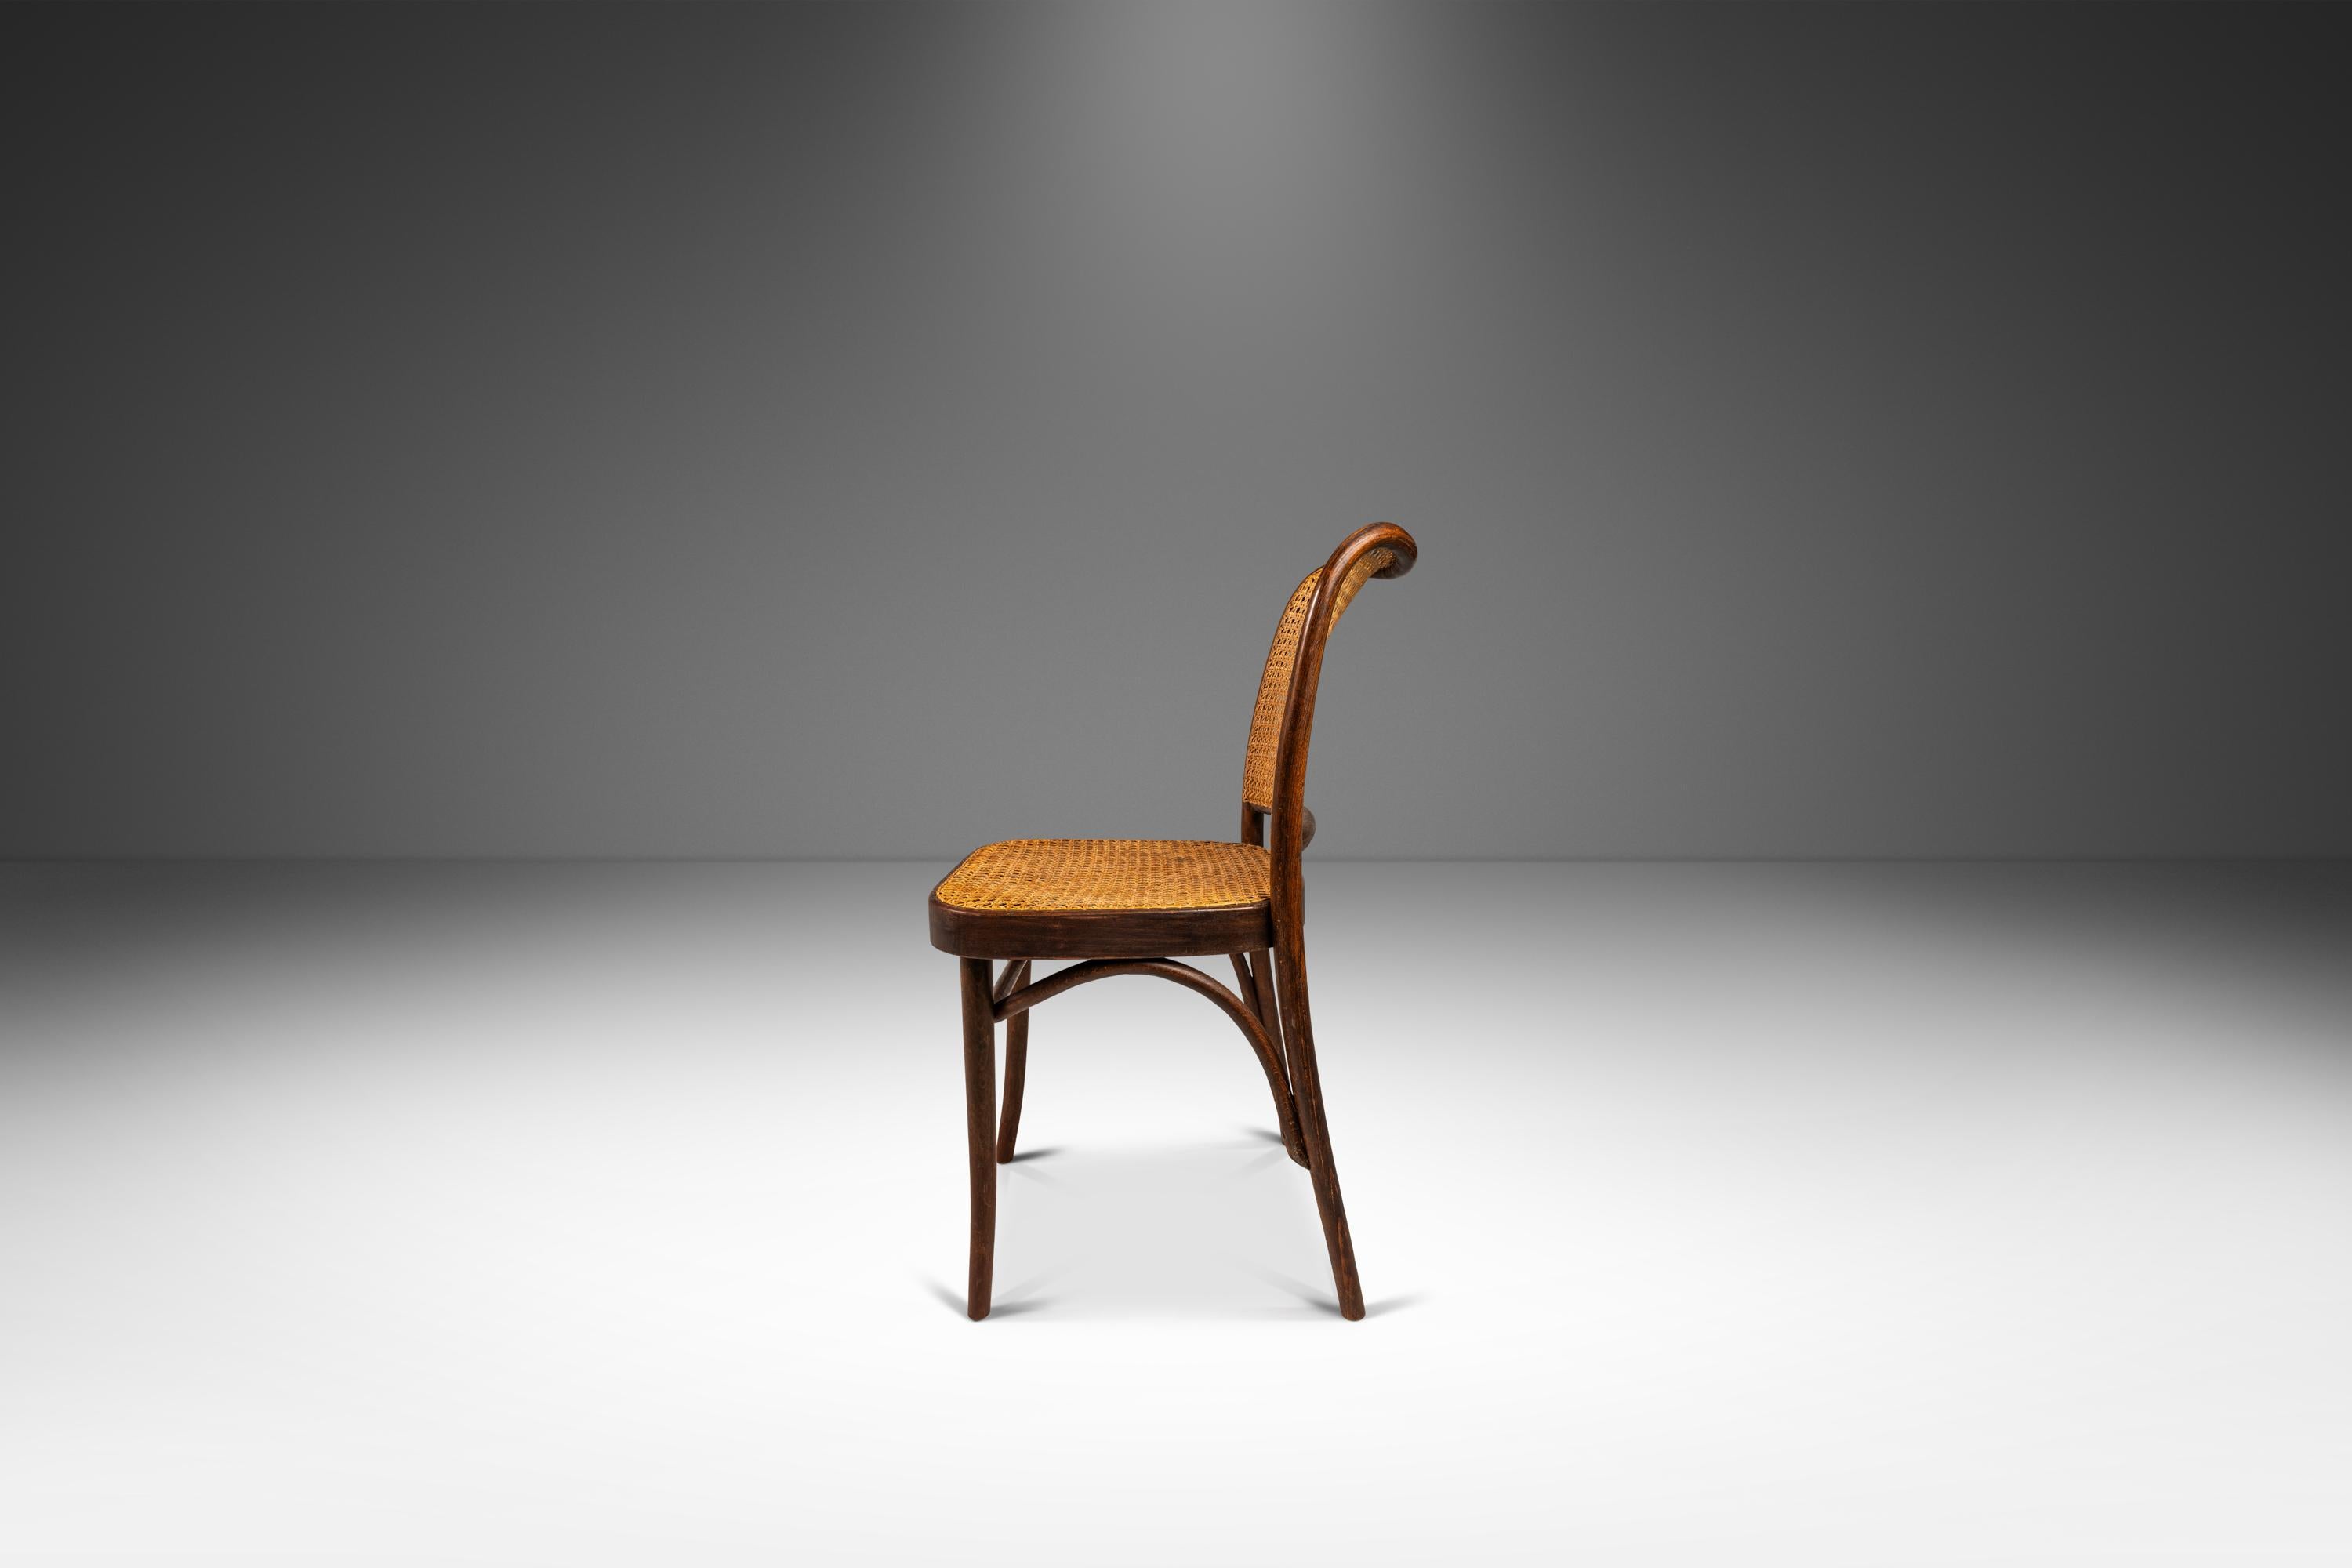 Bentwood Prague Model 811 Chair in Walnut by Josef Frank, Poland, c. 1960s For Sale 4